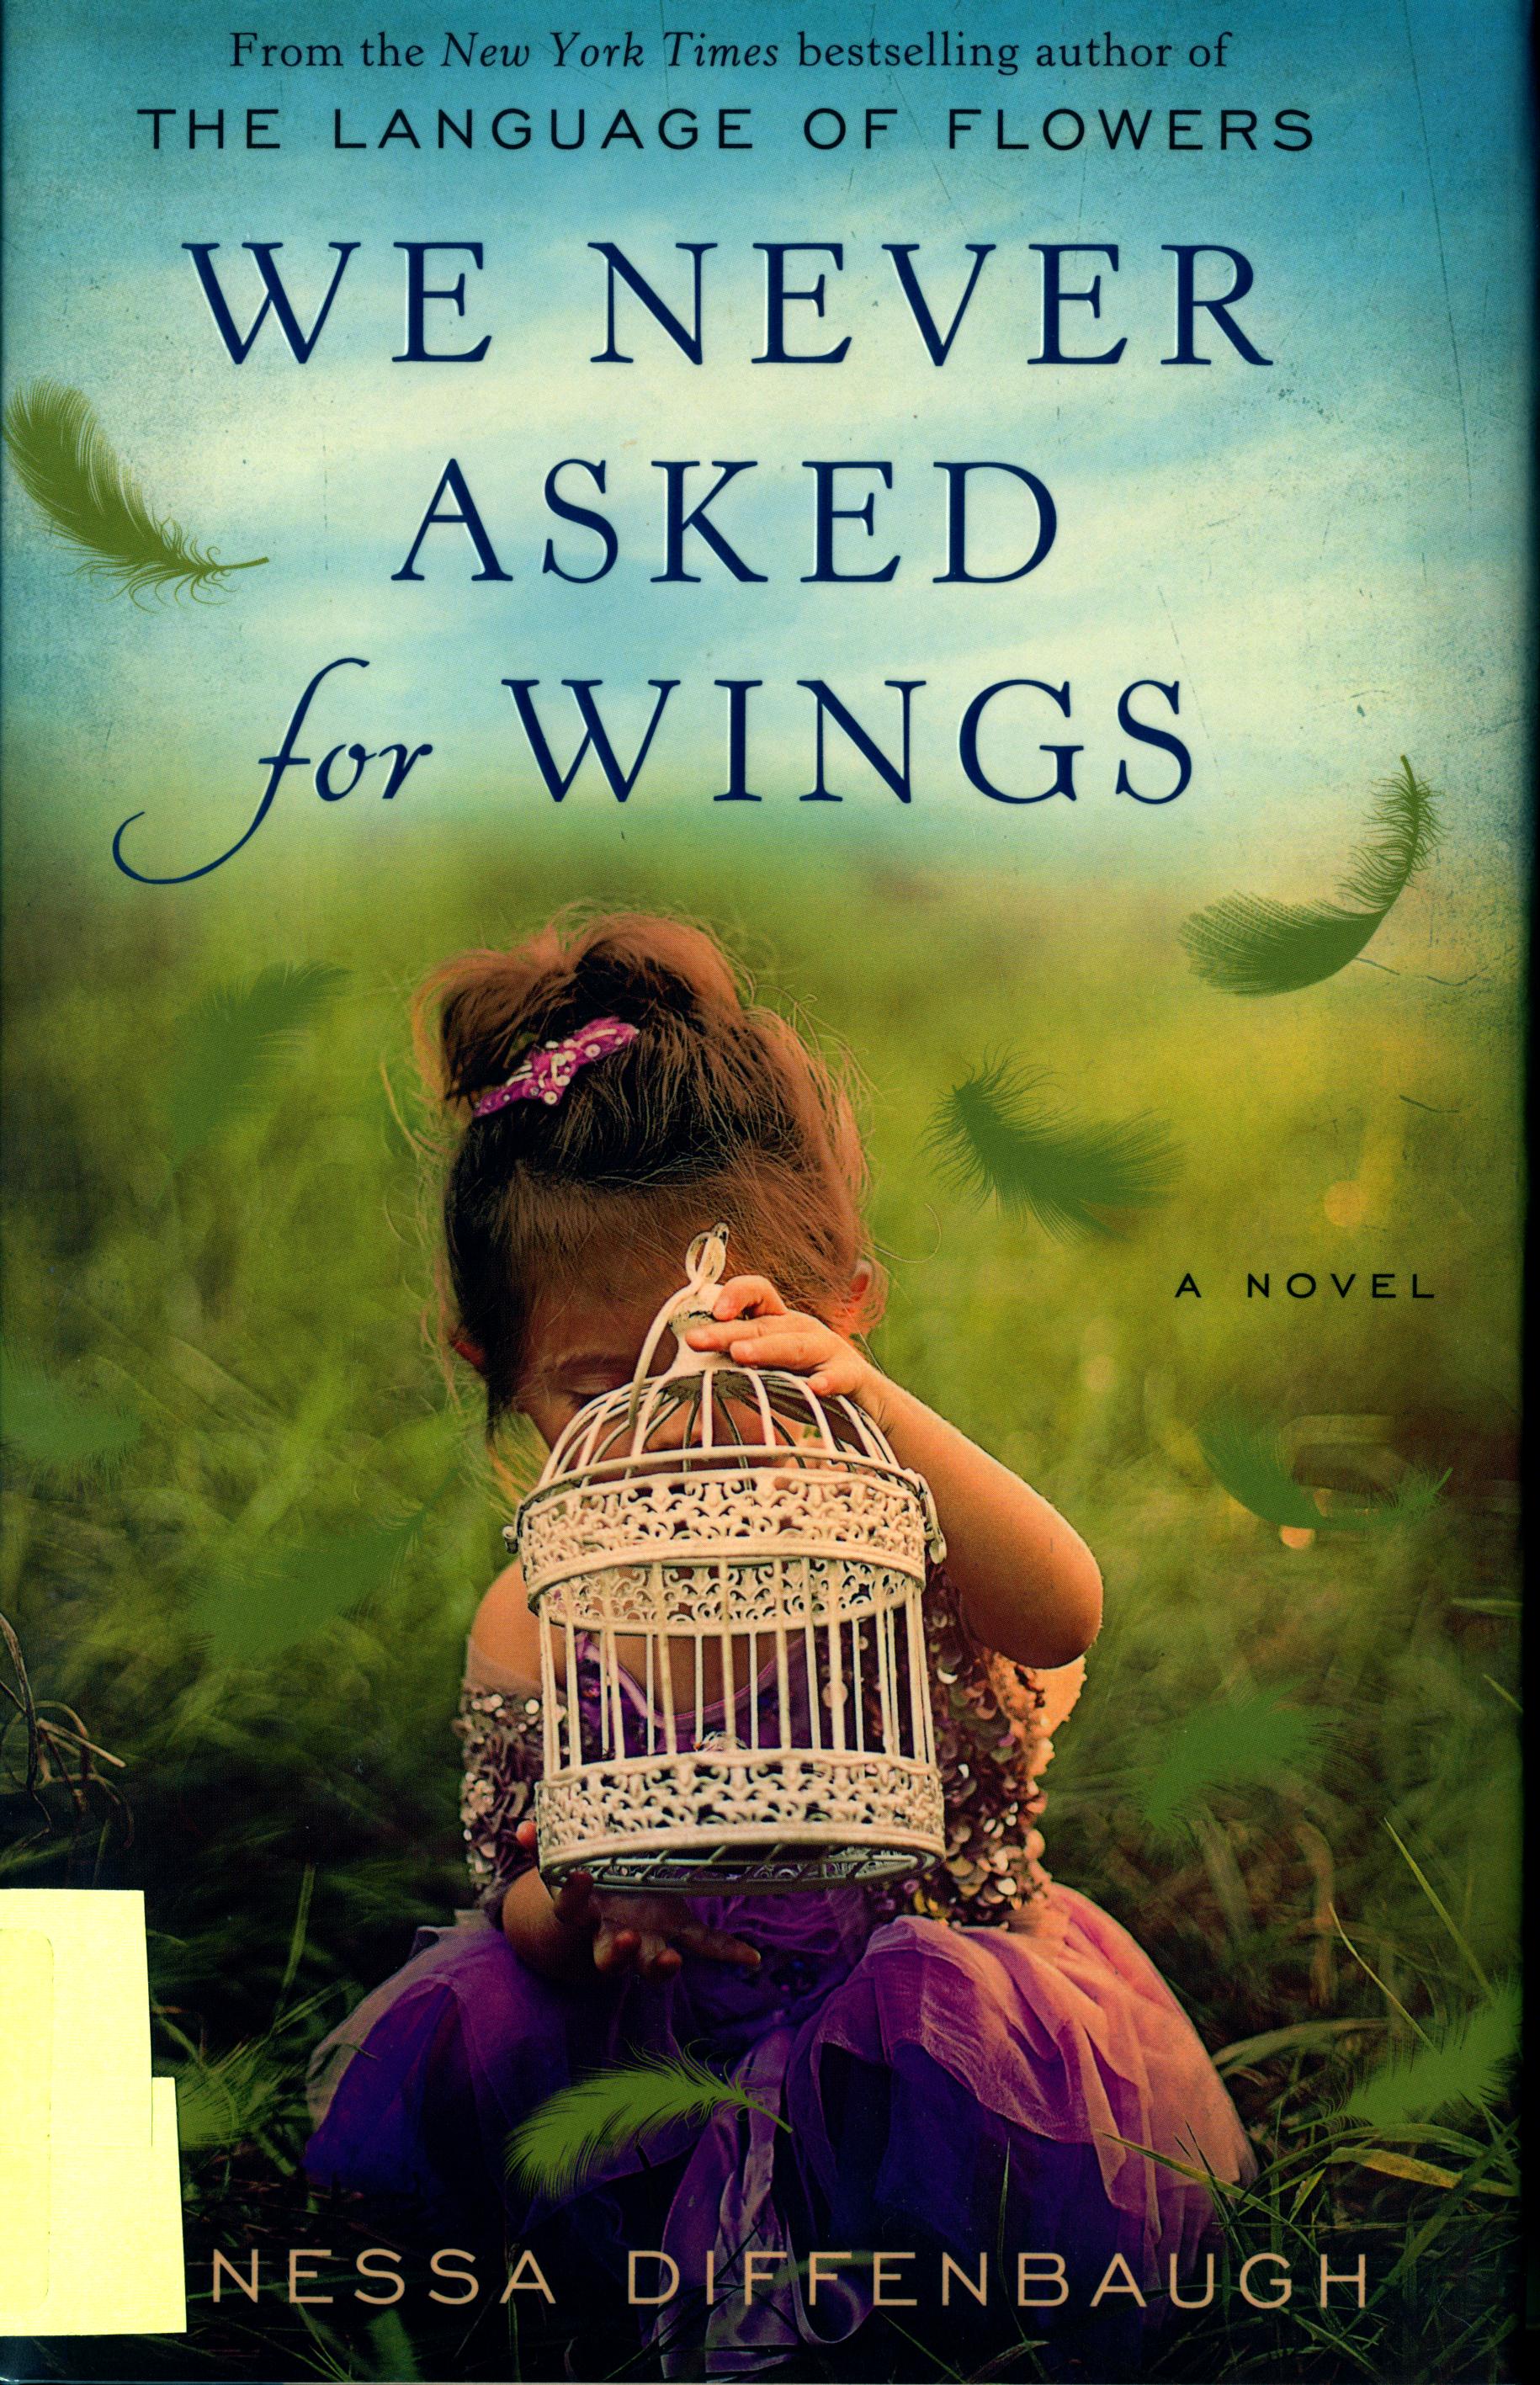 The cover of Vanessa Diffenbaugh's novel We Never Asked for Wings